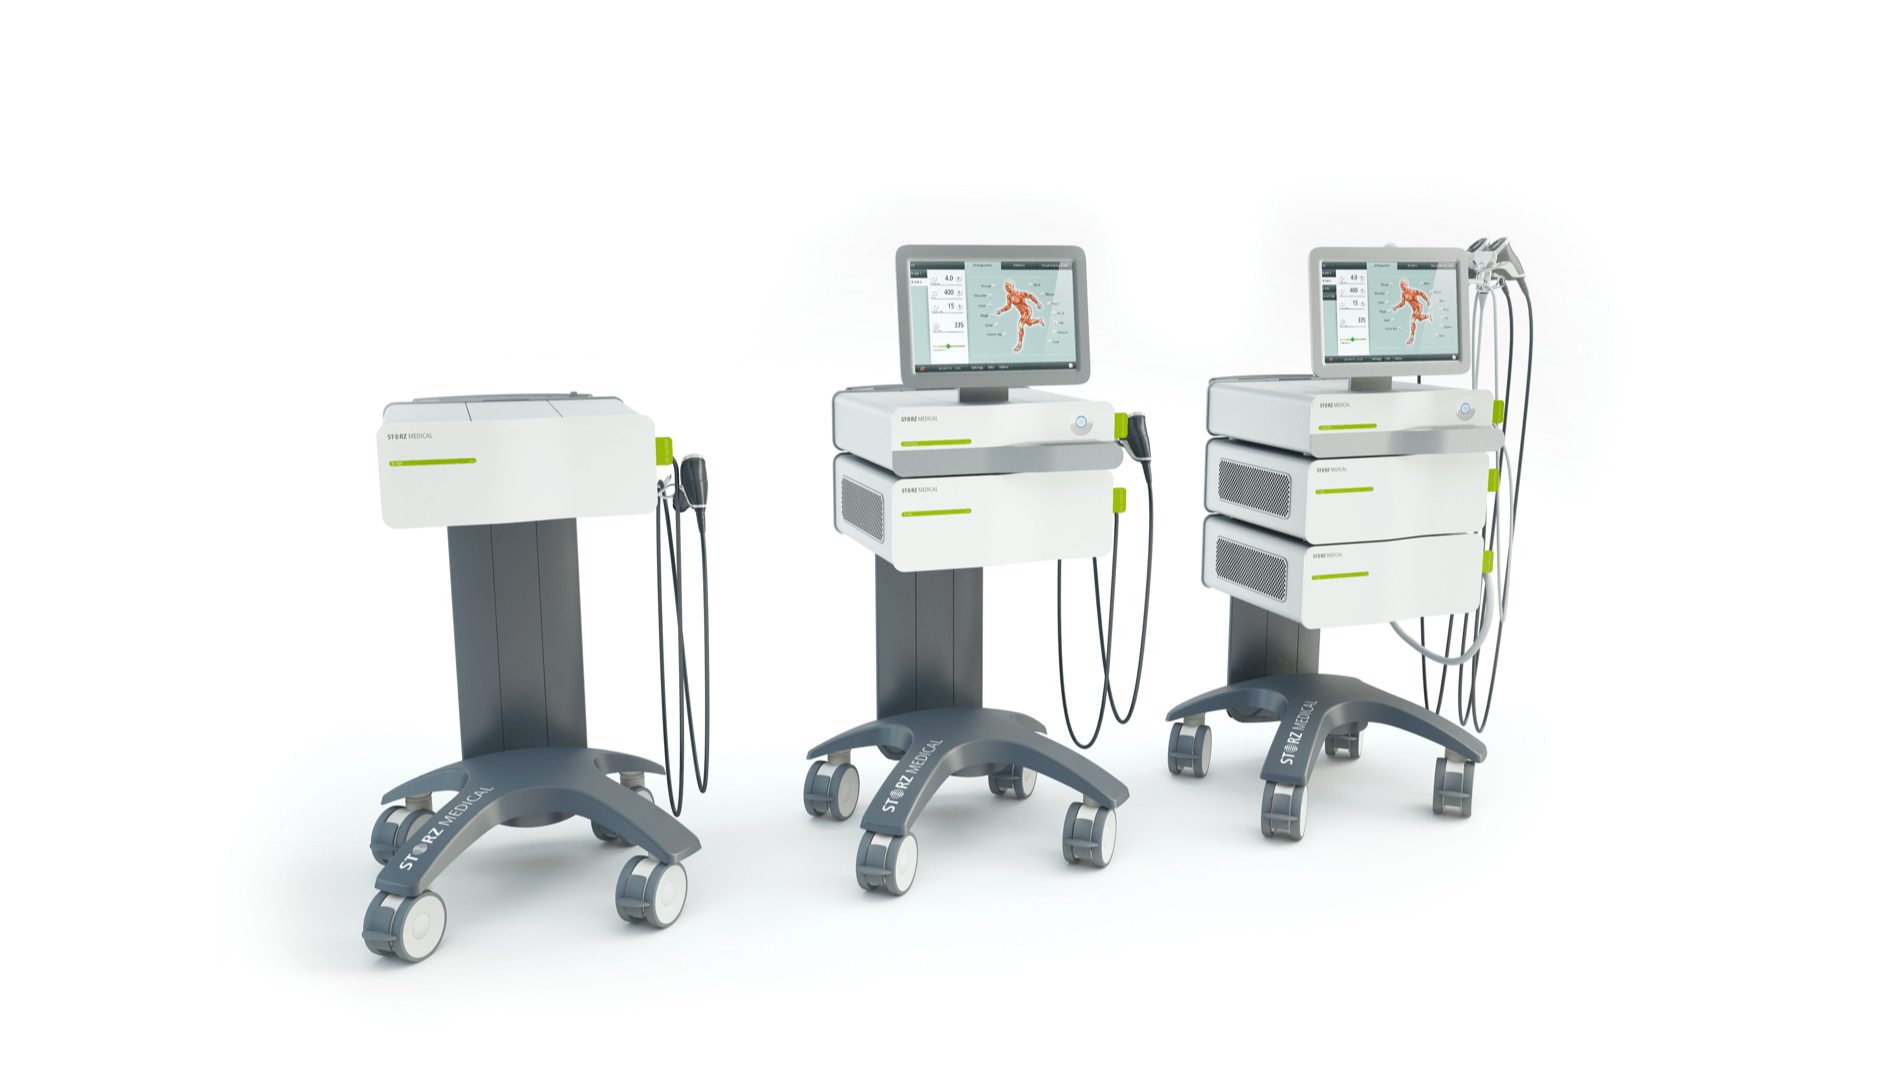 The Duolith SD1 ultra family by Storz Medical placed in a row